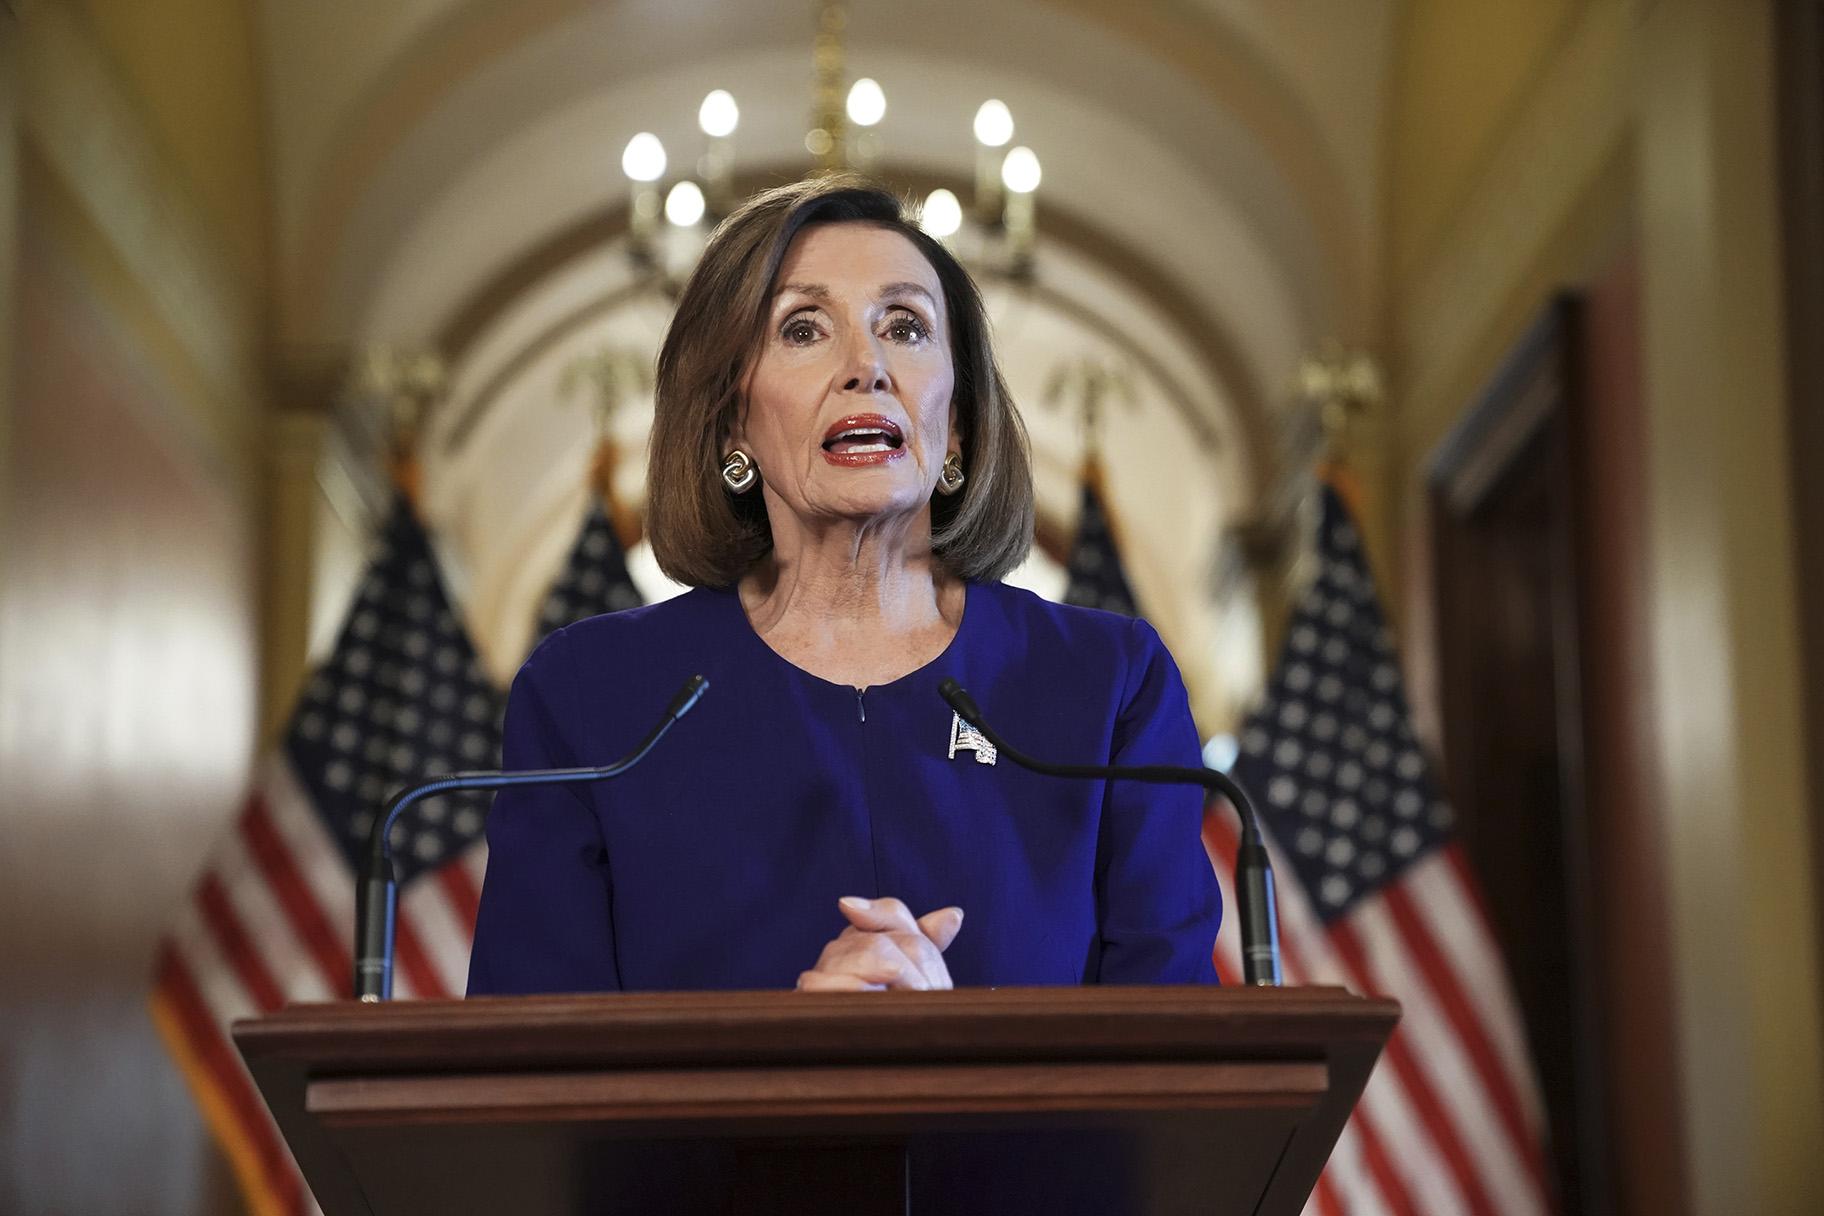 House Speaker Nancy Pelosi, D-Calif., reads a statement announcing a formal impeachment inquiry into President Donald Trump on Capitol Hill in Washington, Tuesday, Sept. 24, 2019. (AP Photo / Andrew Harnik)